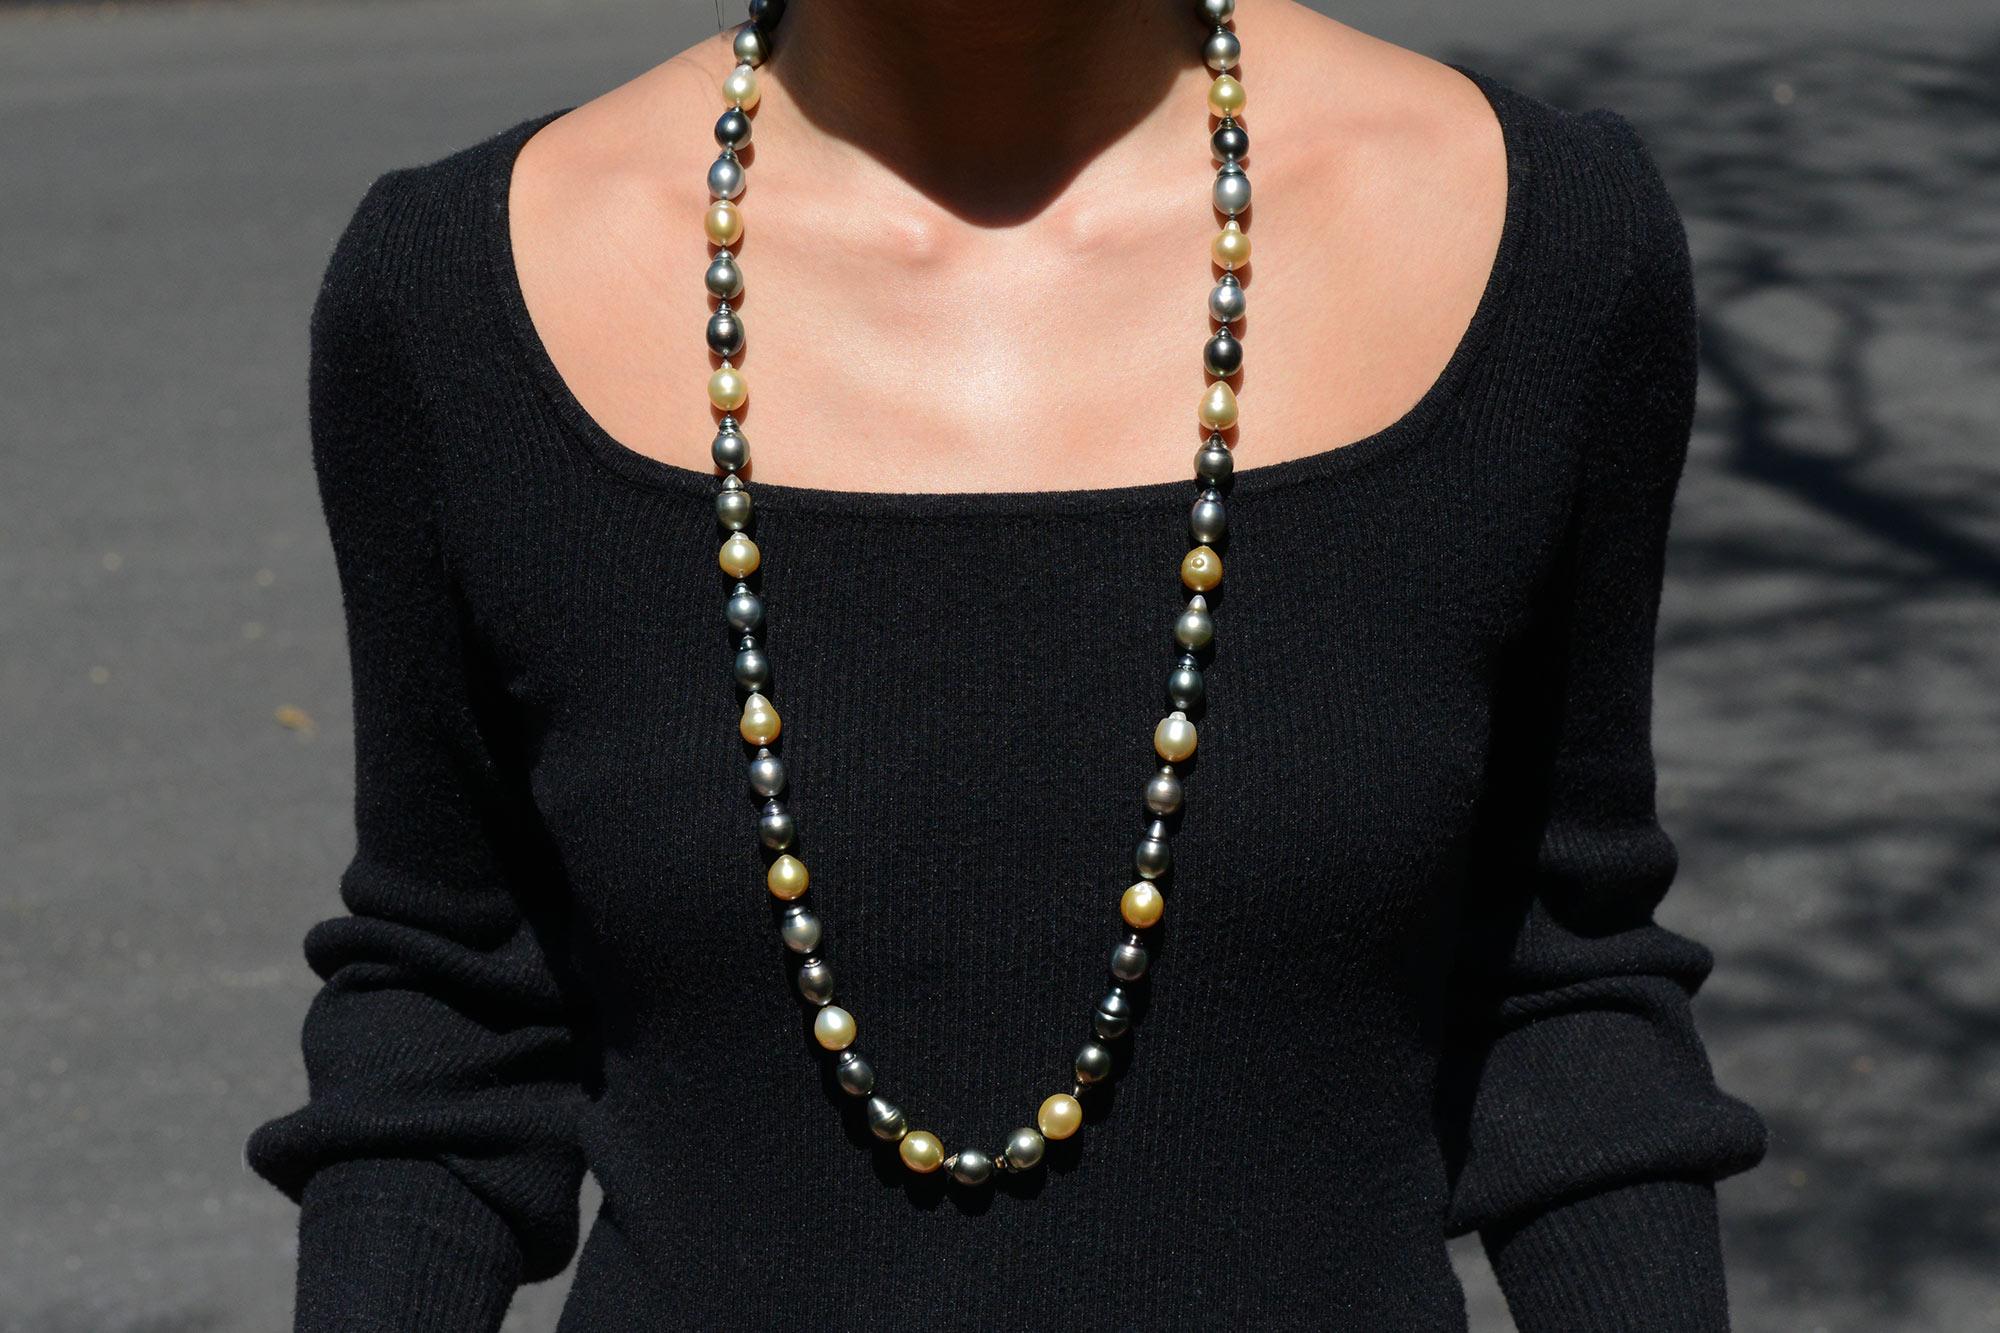 A magnificent opera length multi-color pearl strand exhibiting numerous Tahitian and South Sea pearls. The Tahitian pearls of varying shades of black, from pistachio to peacock have an incredible orient and they pair wonderfully with the beaming